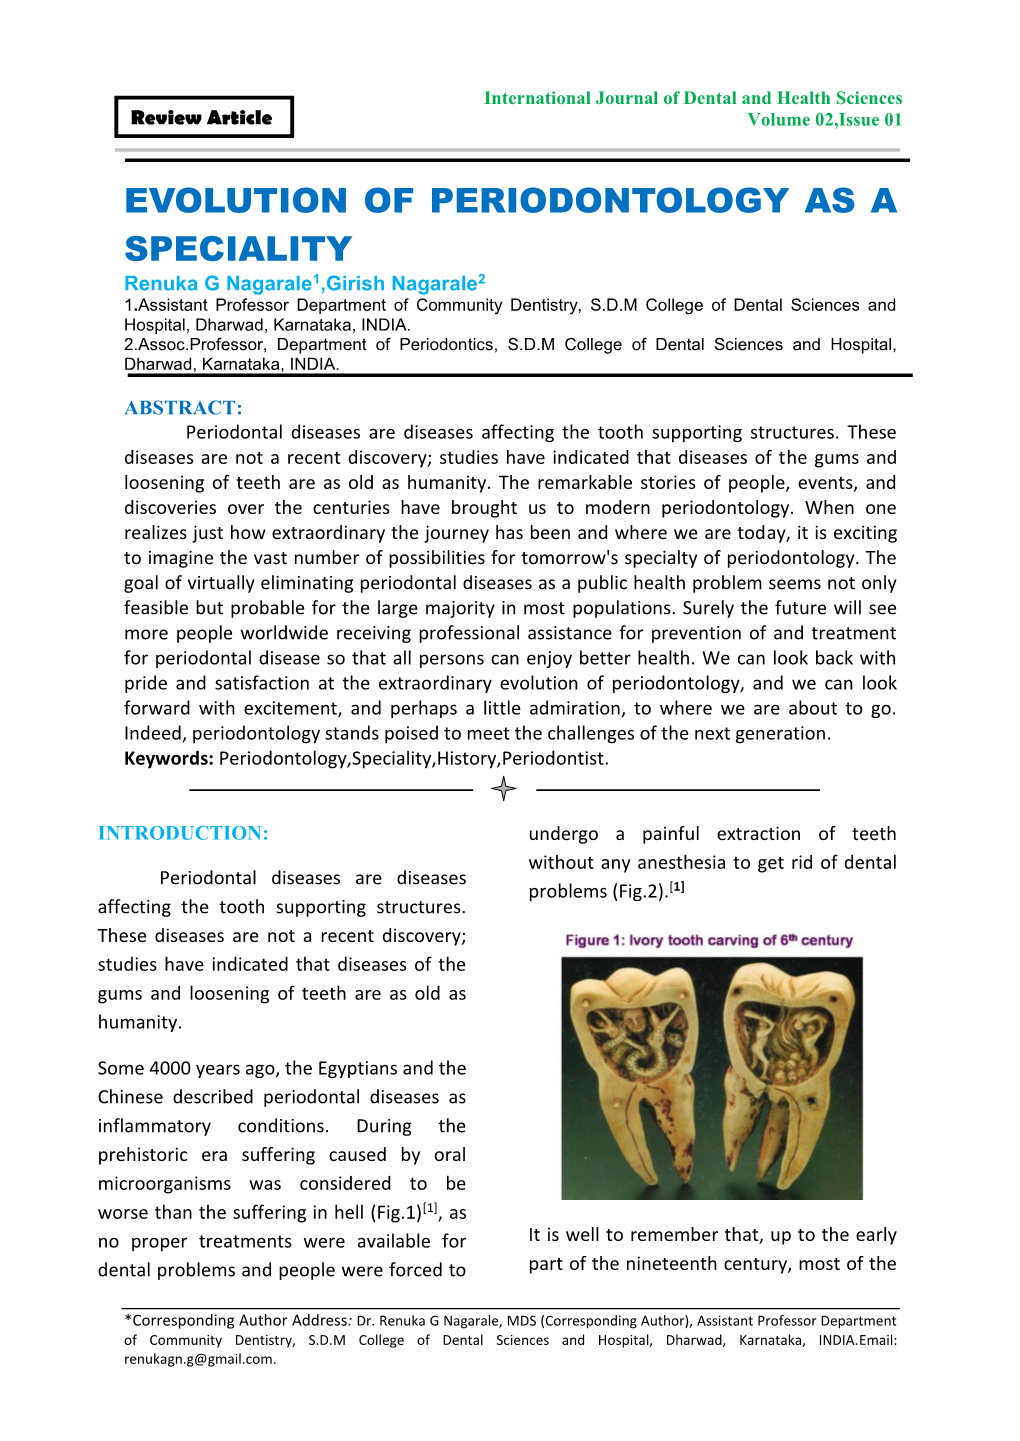 Evolution of Periodontology As a Speciality